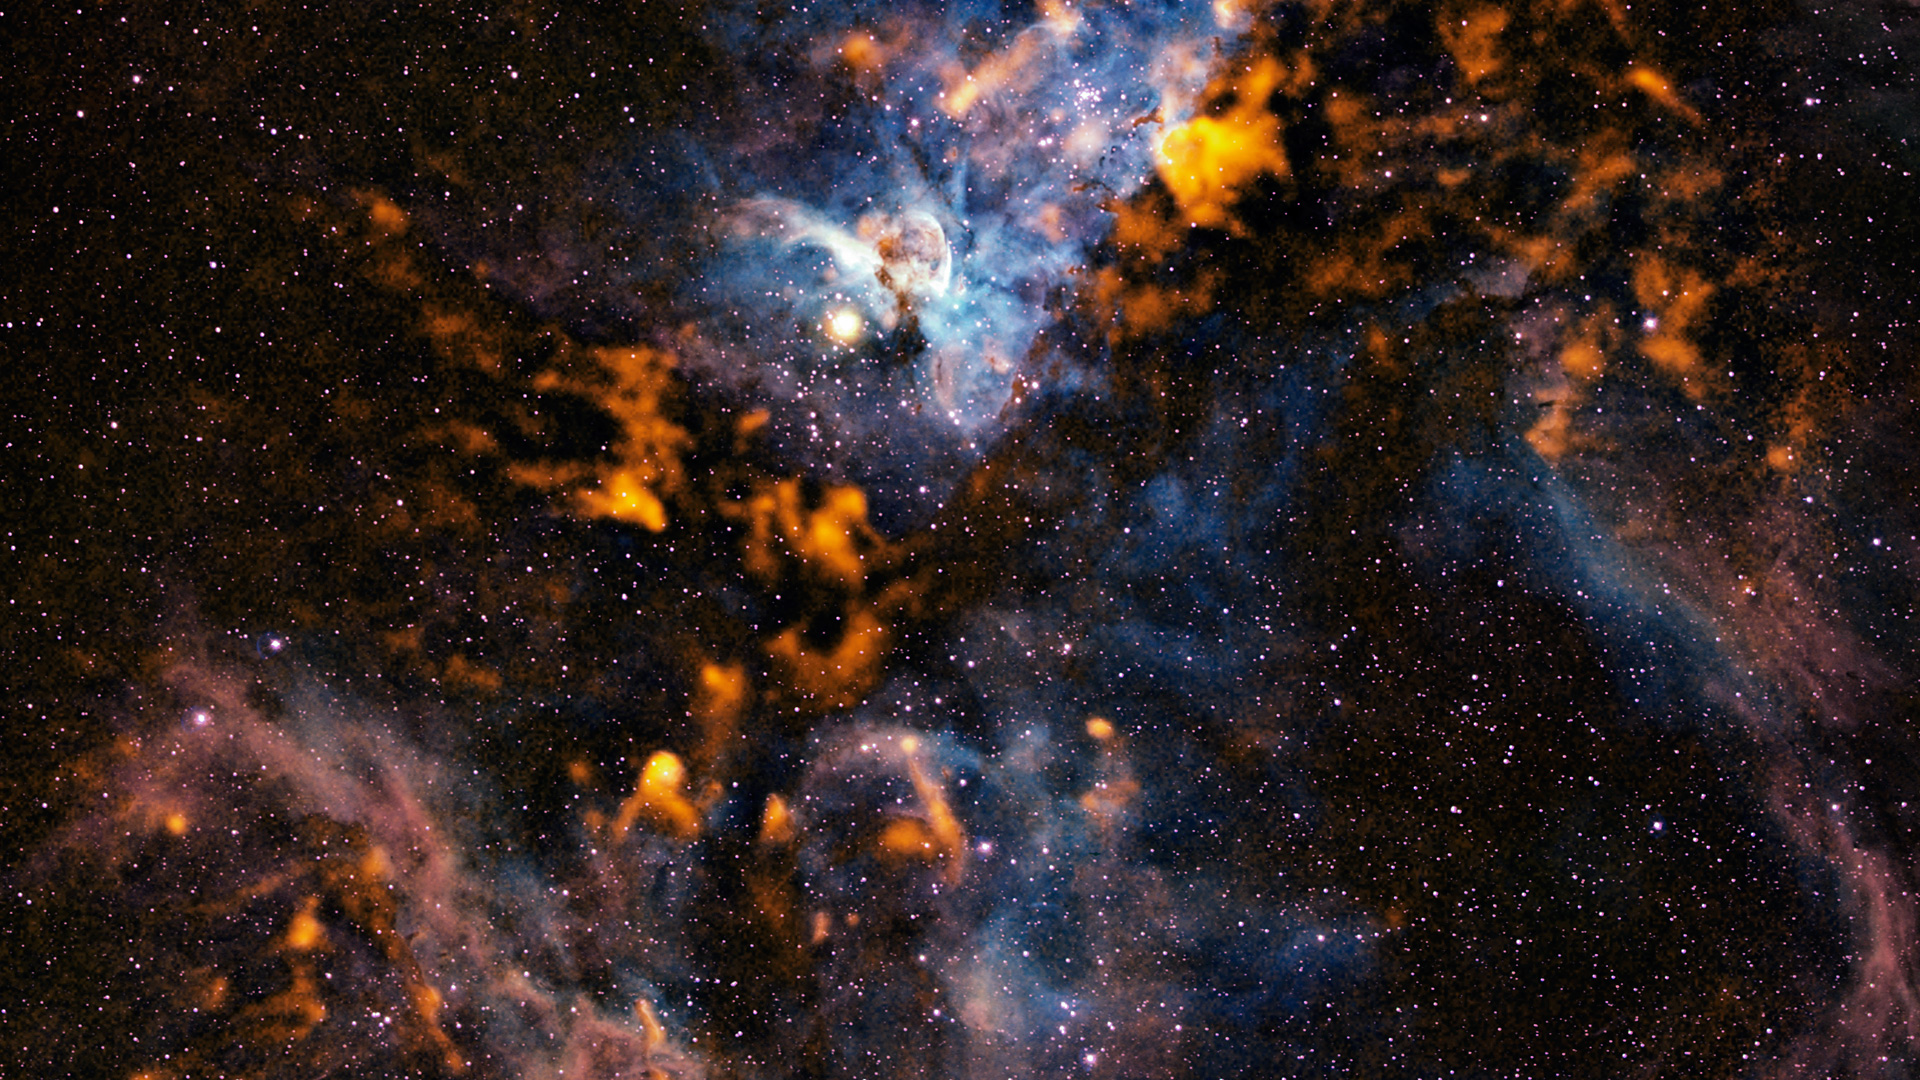 In Pics: Captivating Images Of 'Carina Nebula' From The Lenses Of Most  Powerful Telescope